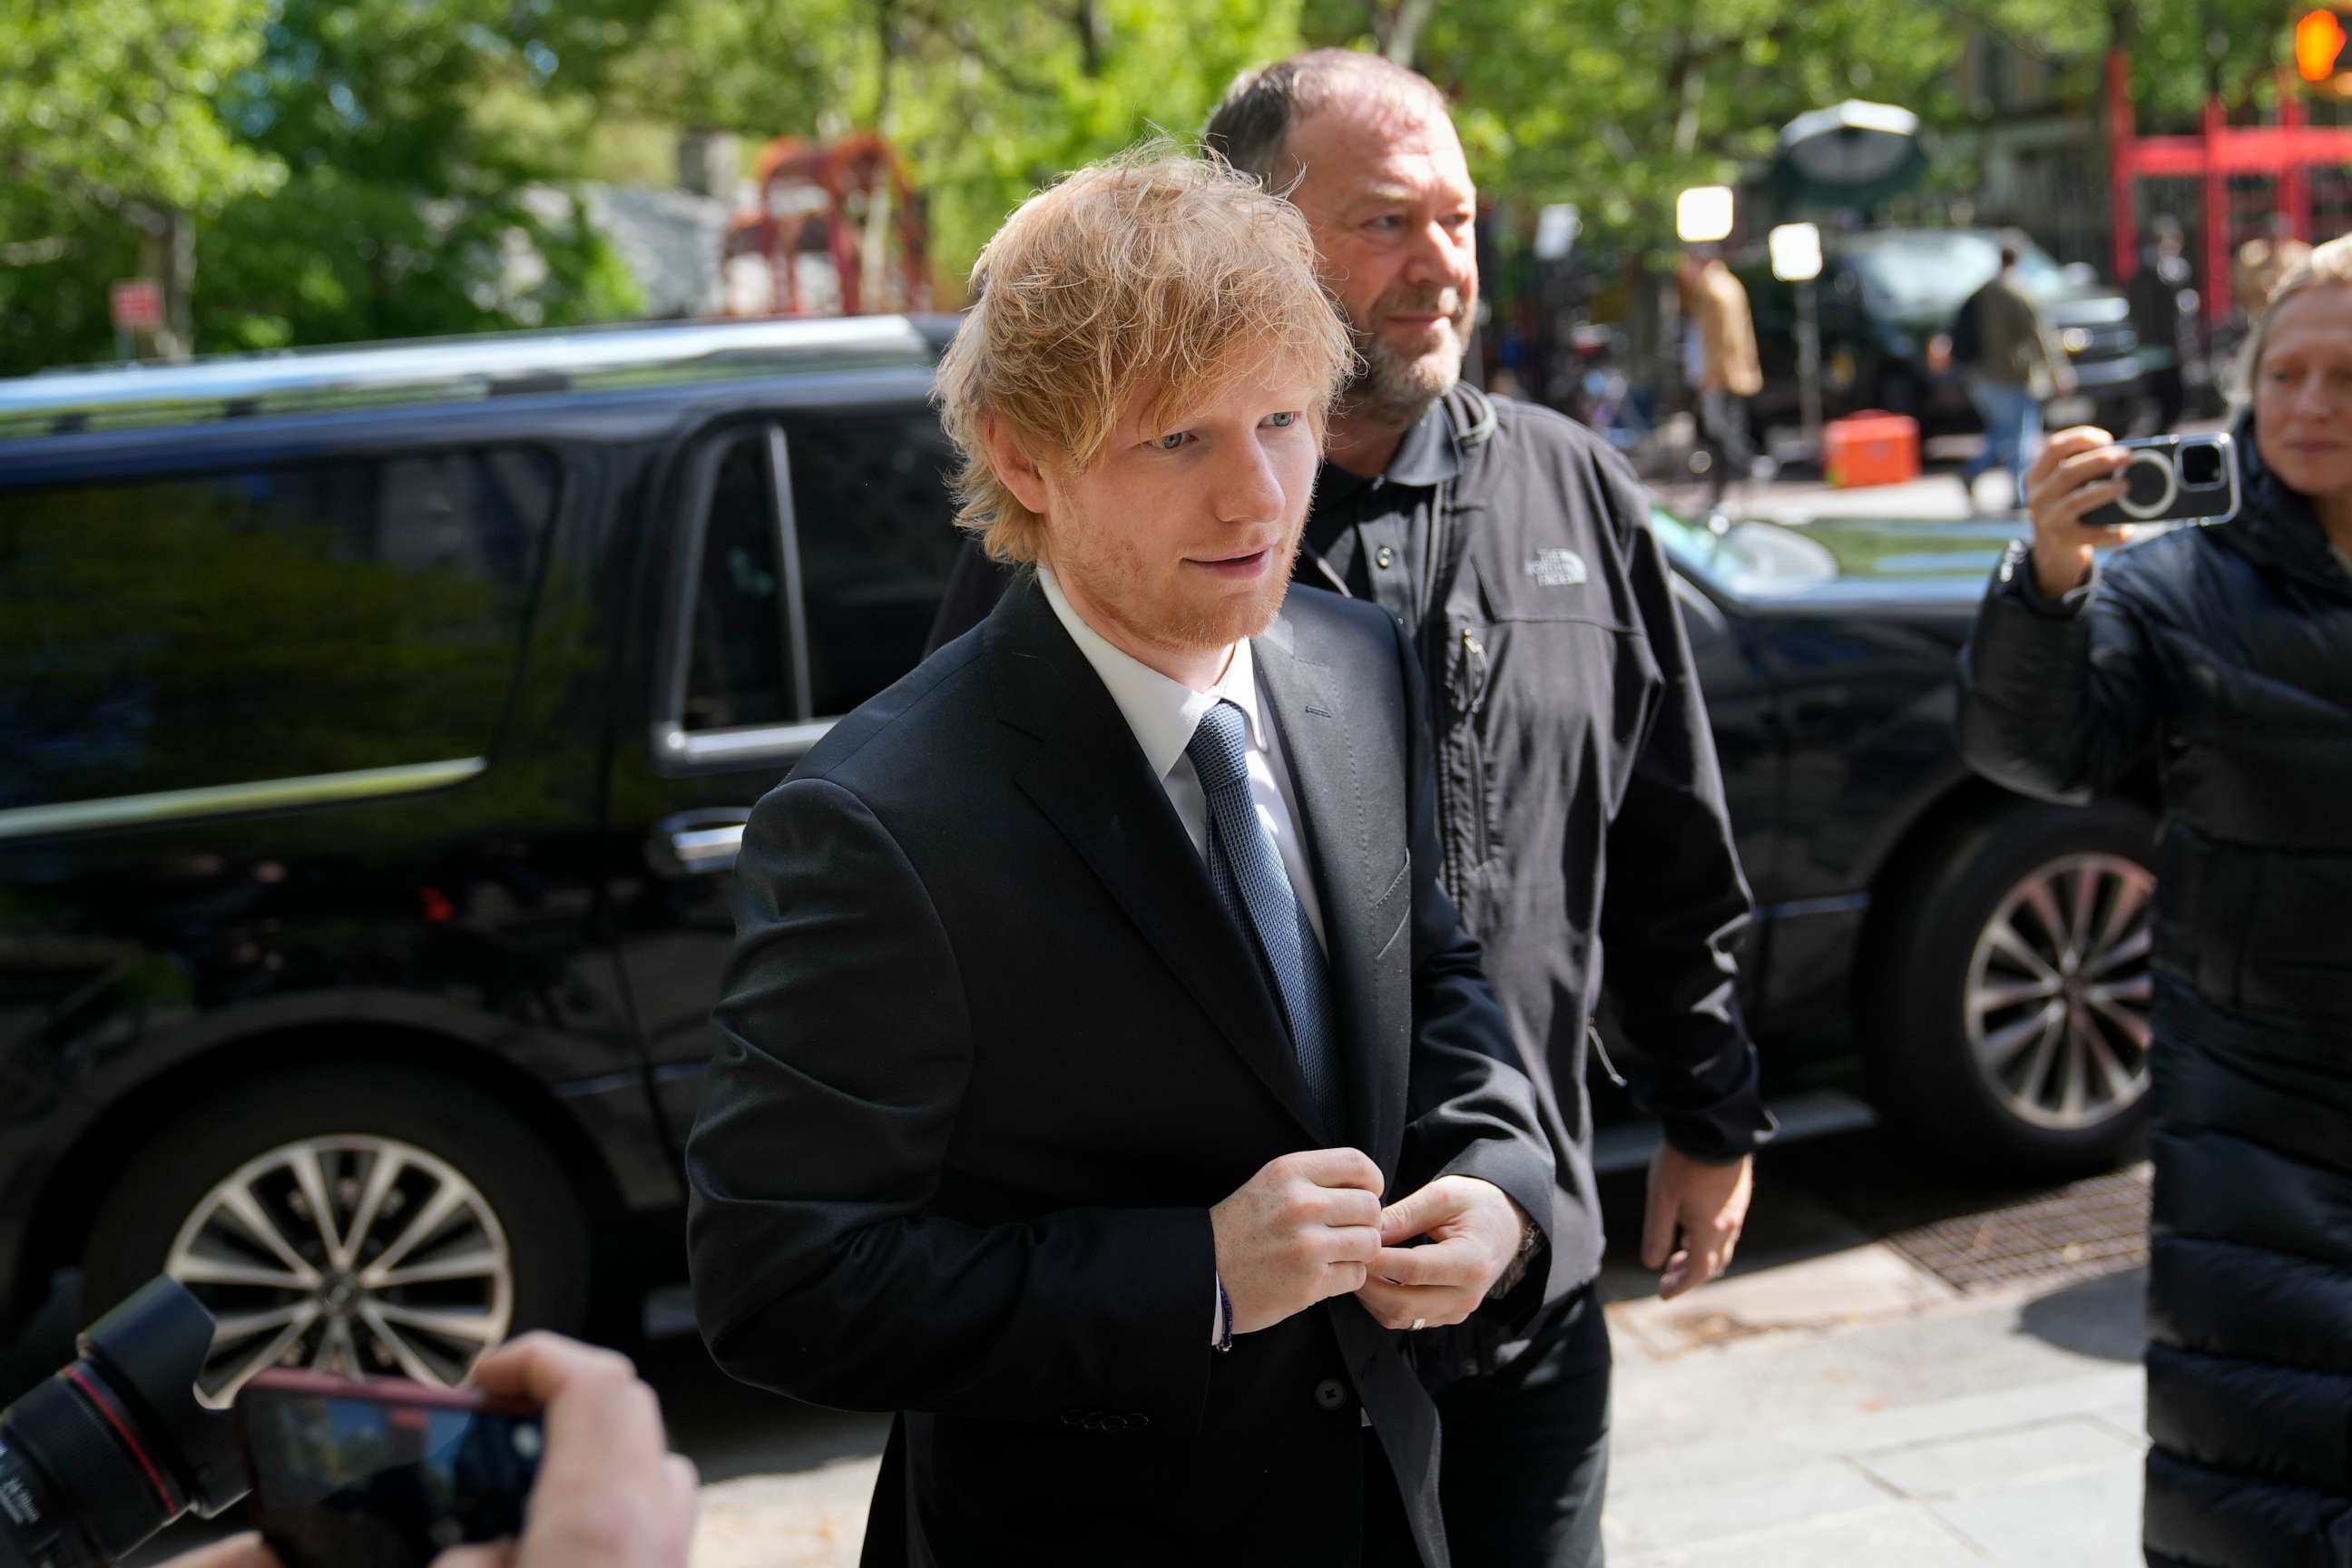 PHOTO: Recording artist Ed Sheeran arrives to New York Federal Court as proceedings continue in his copyright infringement trial, Monday, May 1, 2023, in New York.